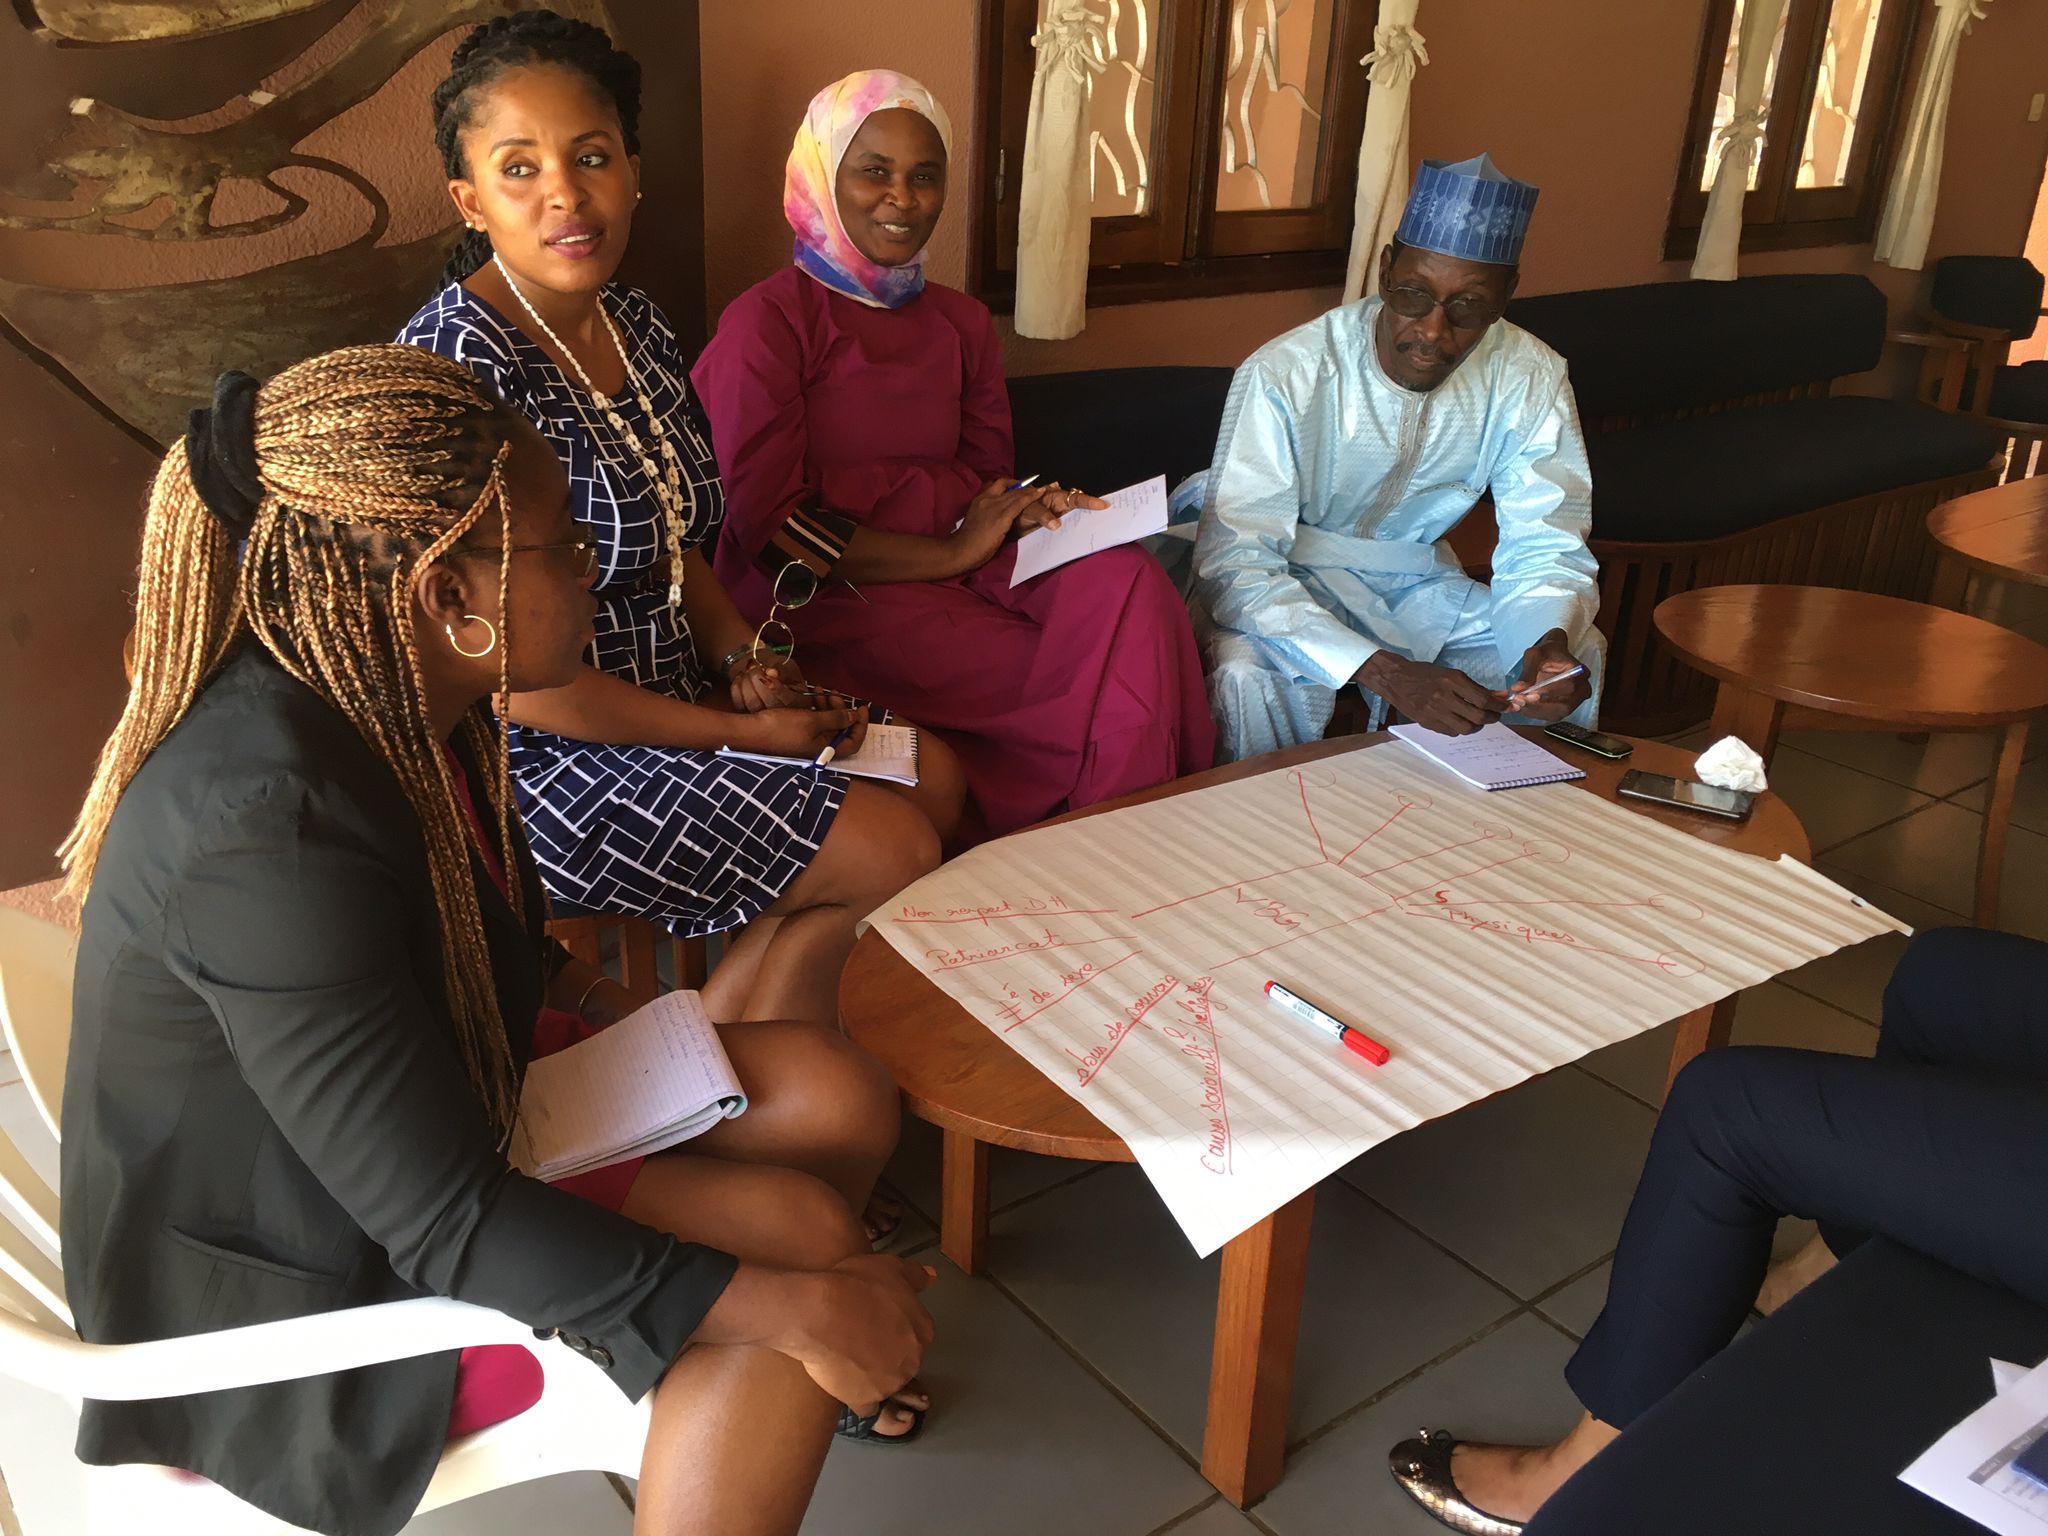 Training for better care of gender-based violence victims in West and Central Africa